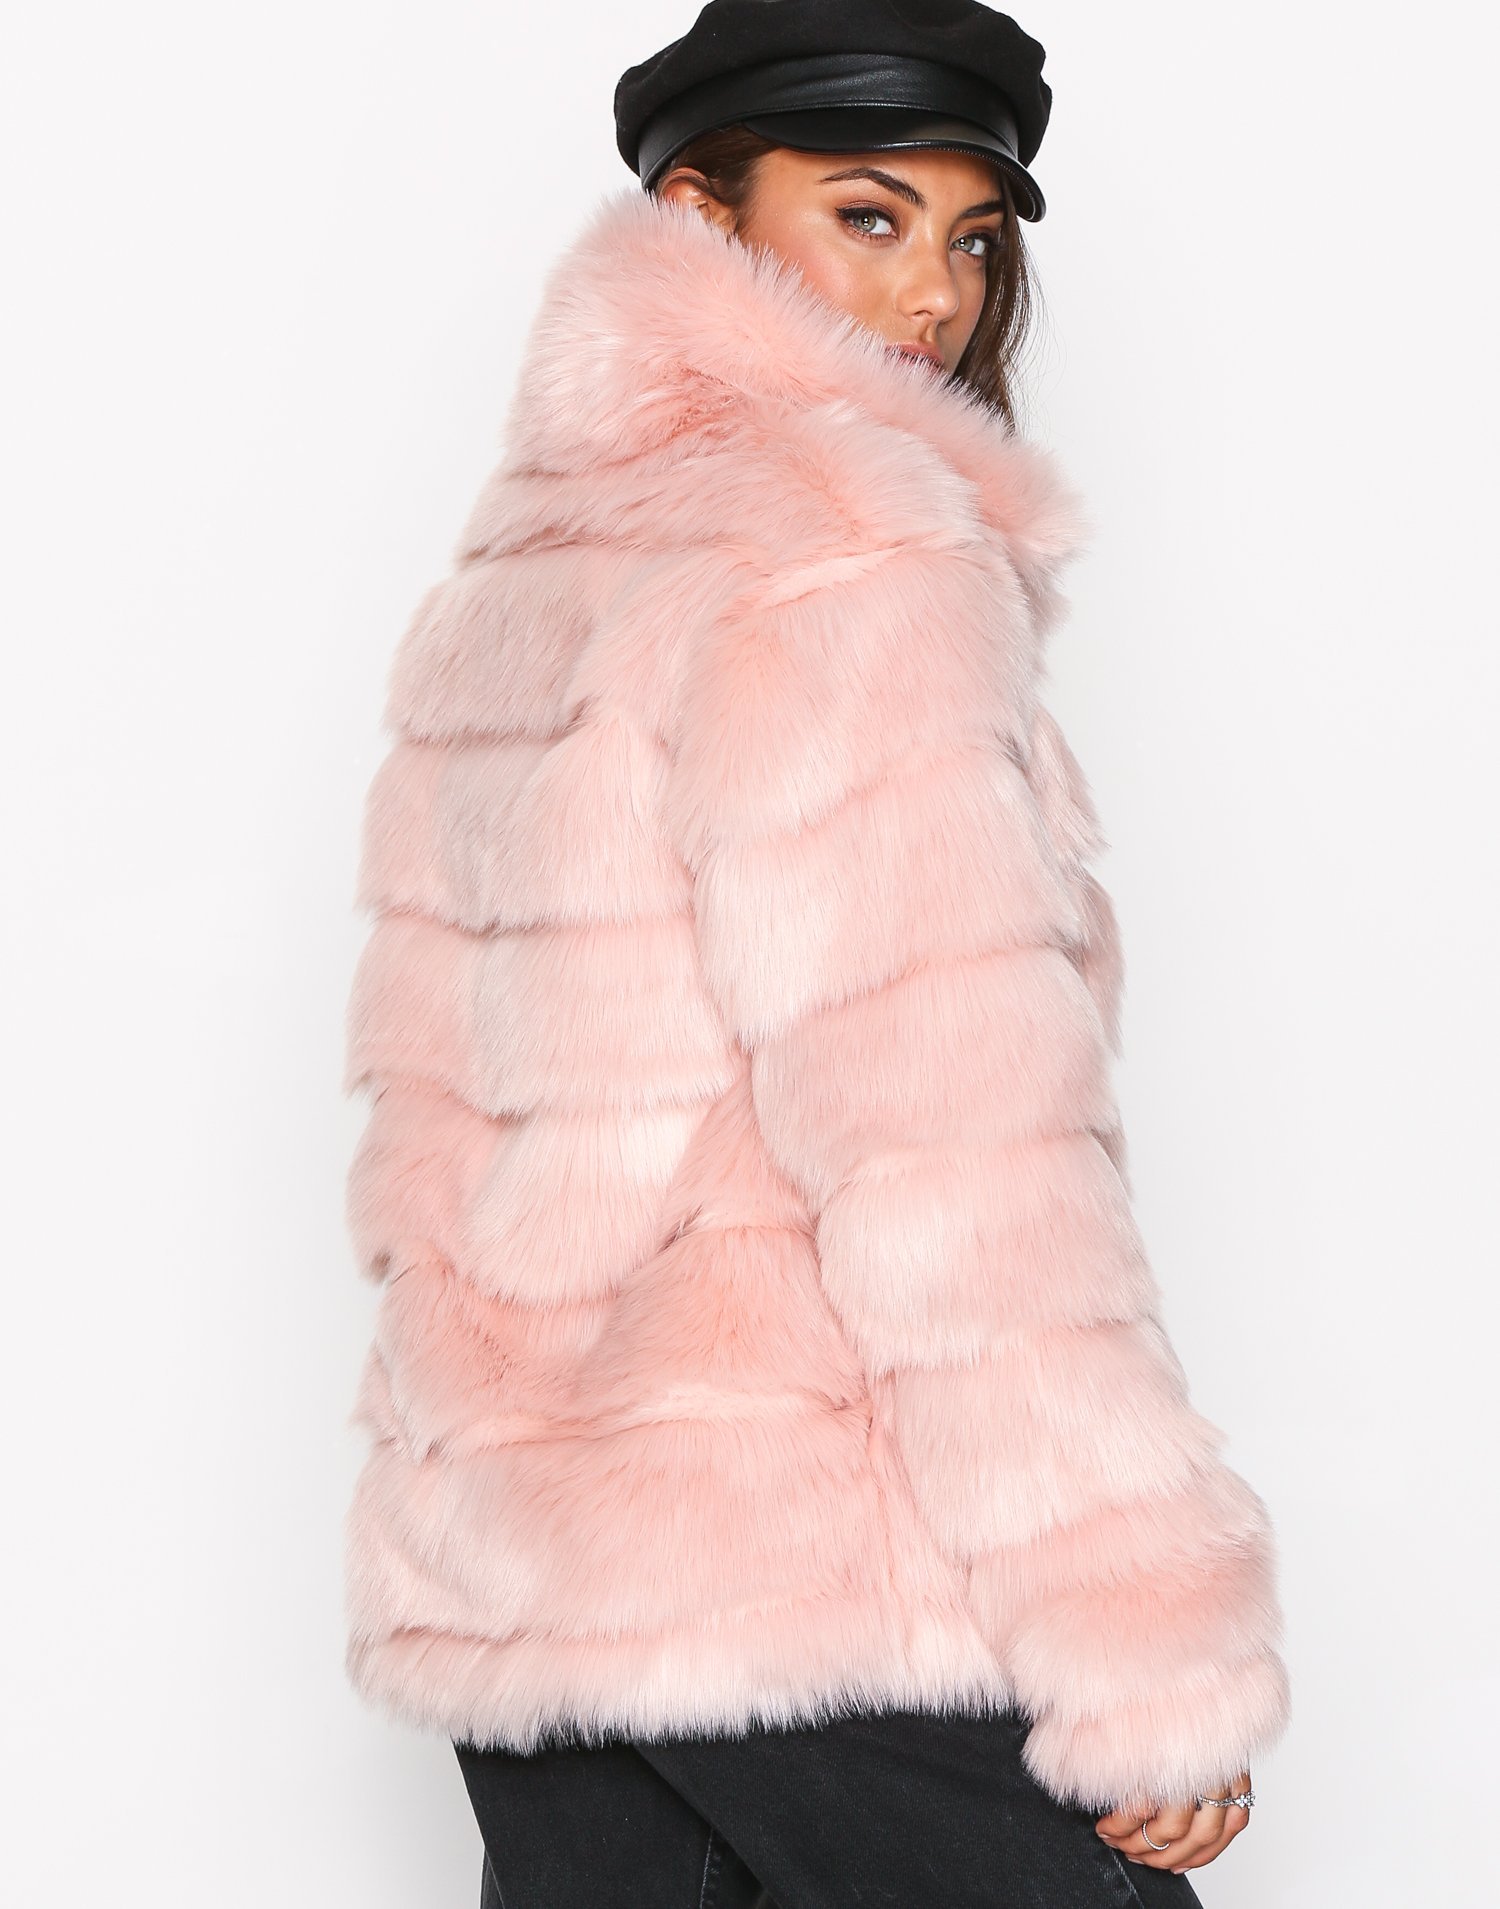 Puffy Fur Coat - Nly Trend - Pink - Jackets - Clothing - Women - Nelly ...